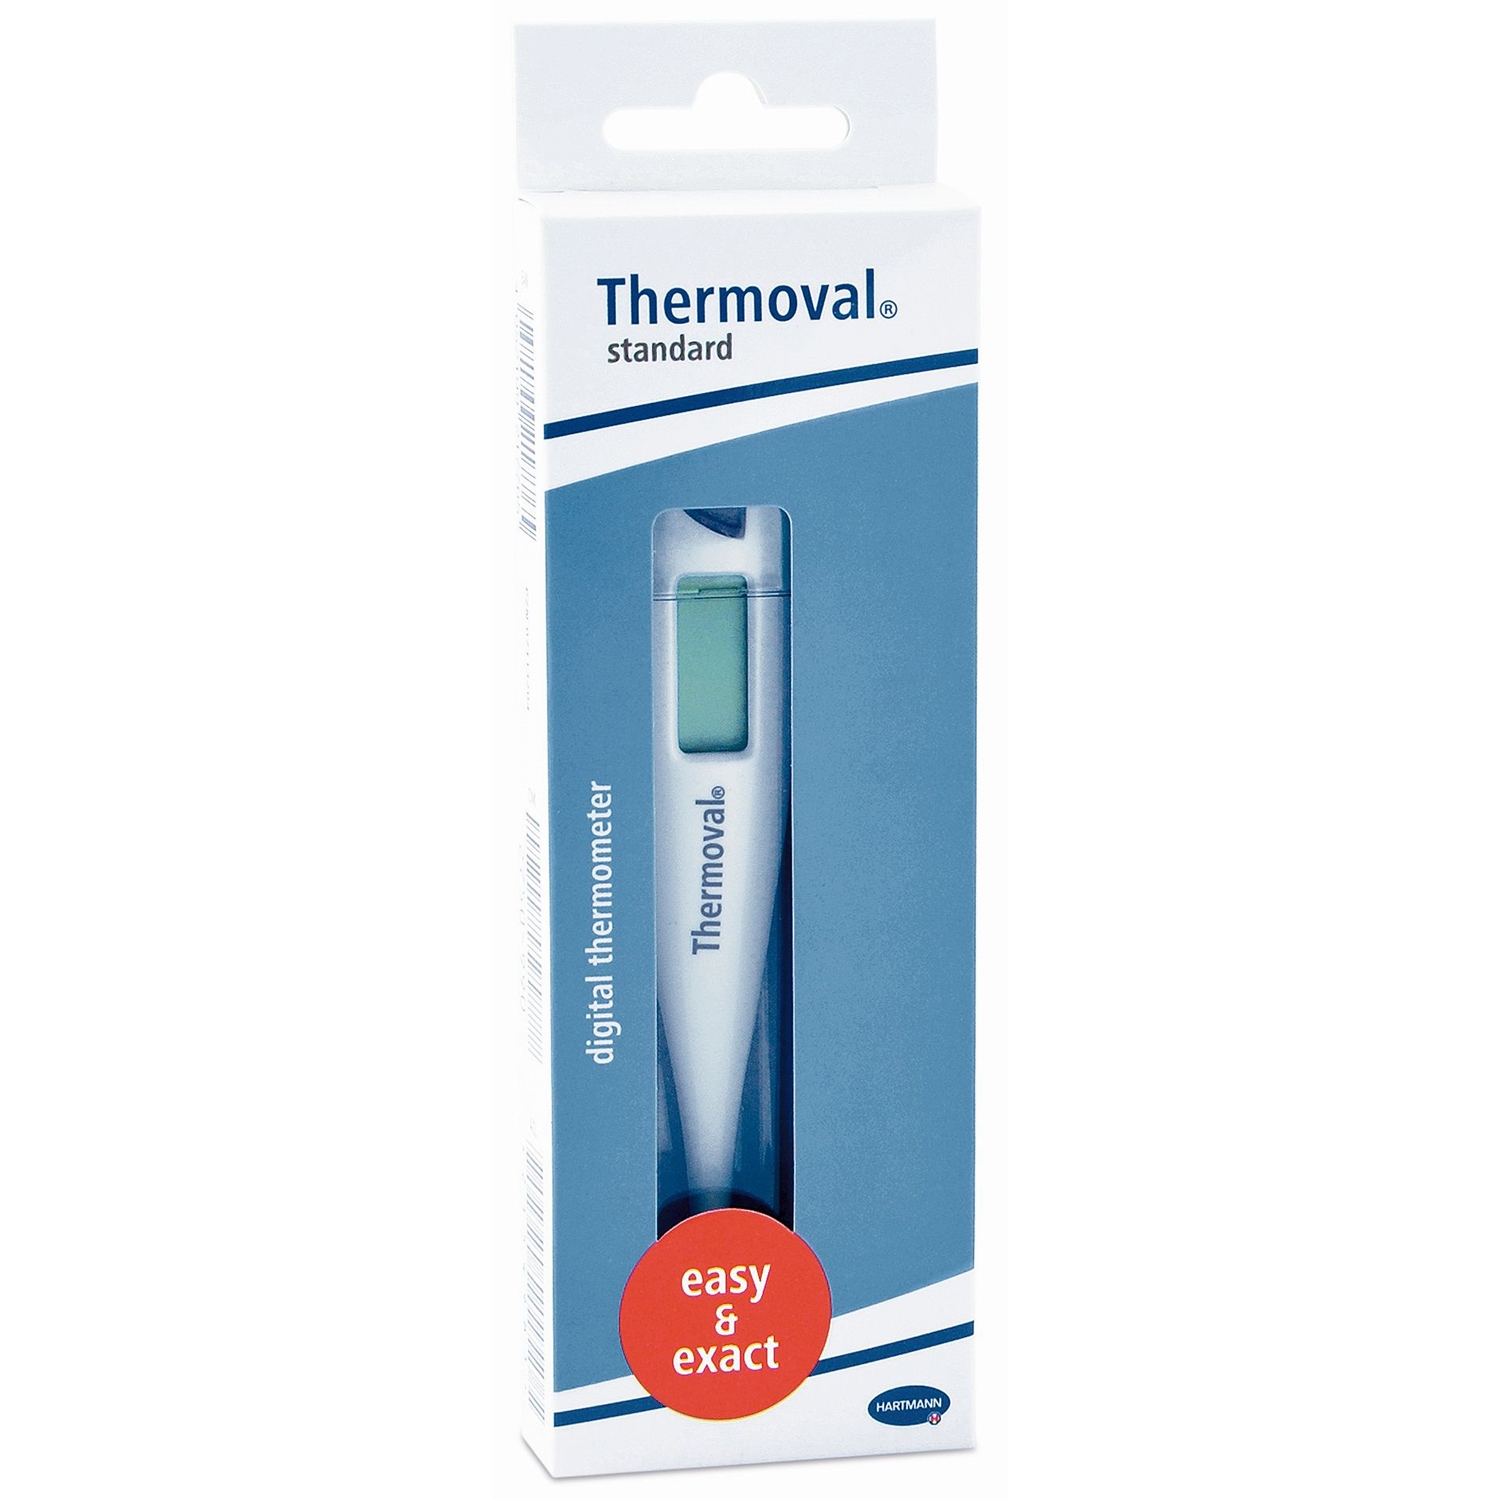 Thermoval standard thermometer